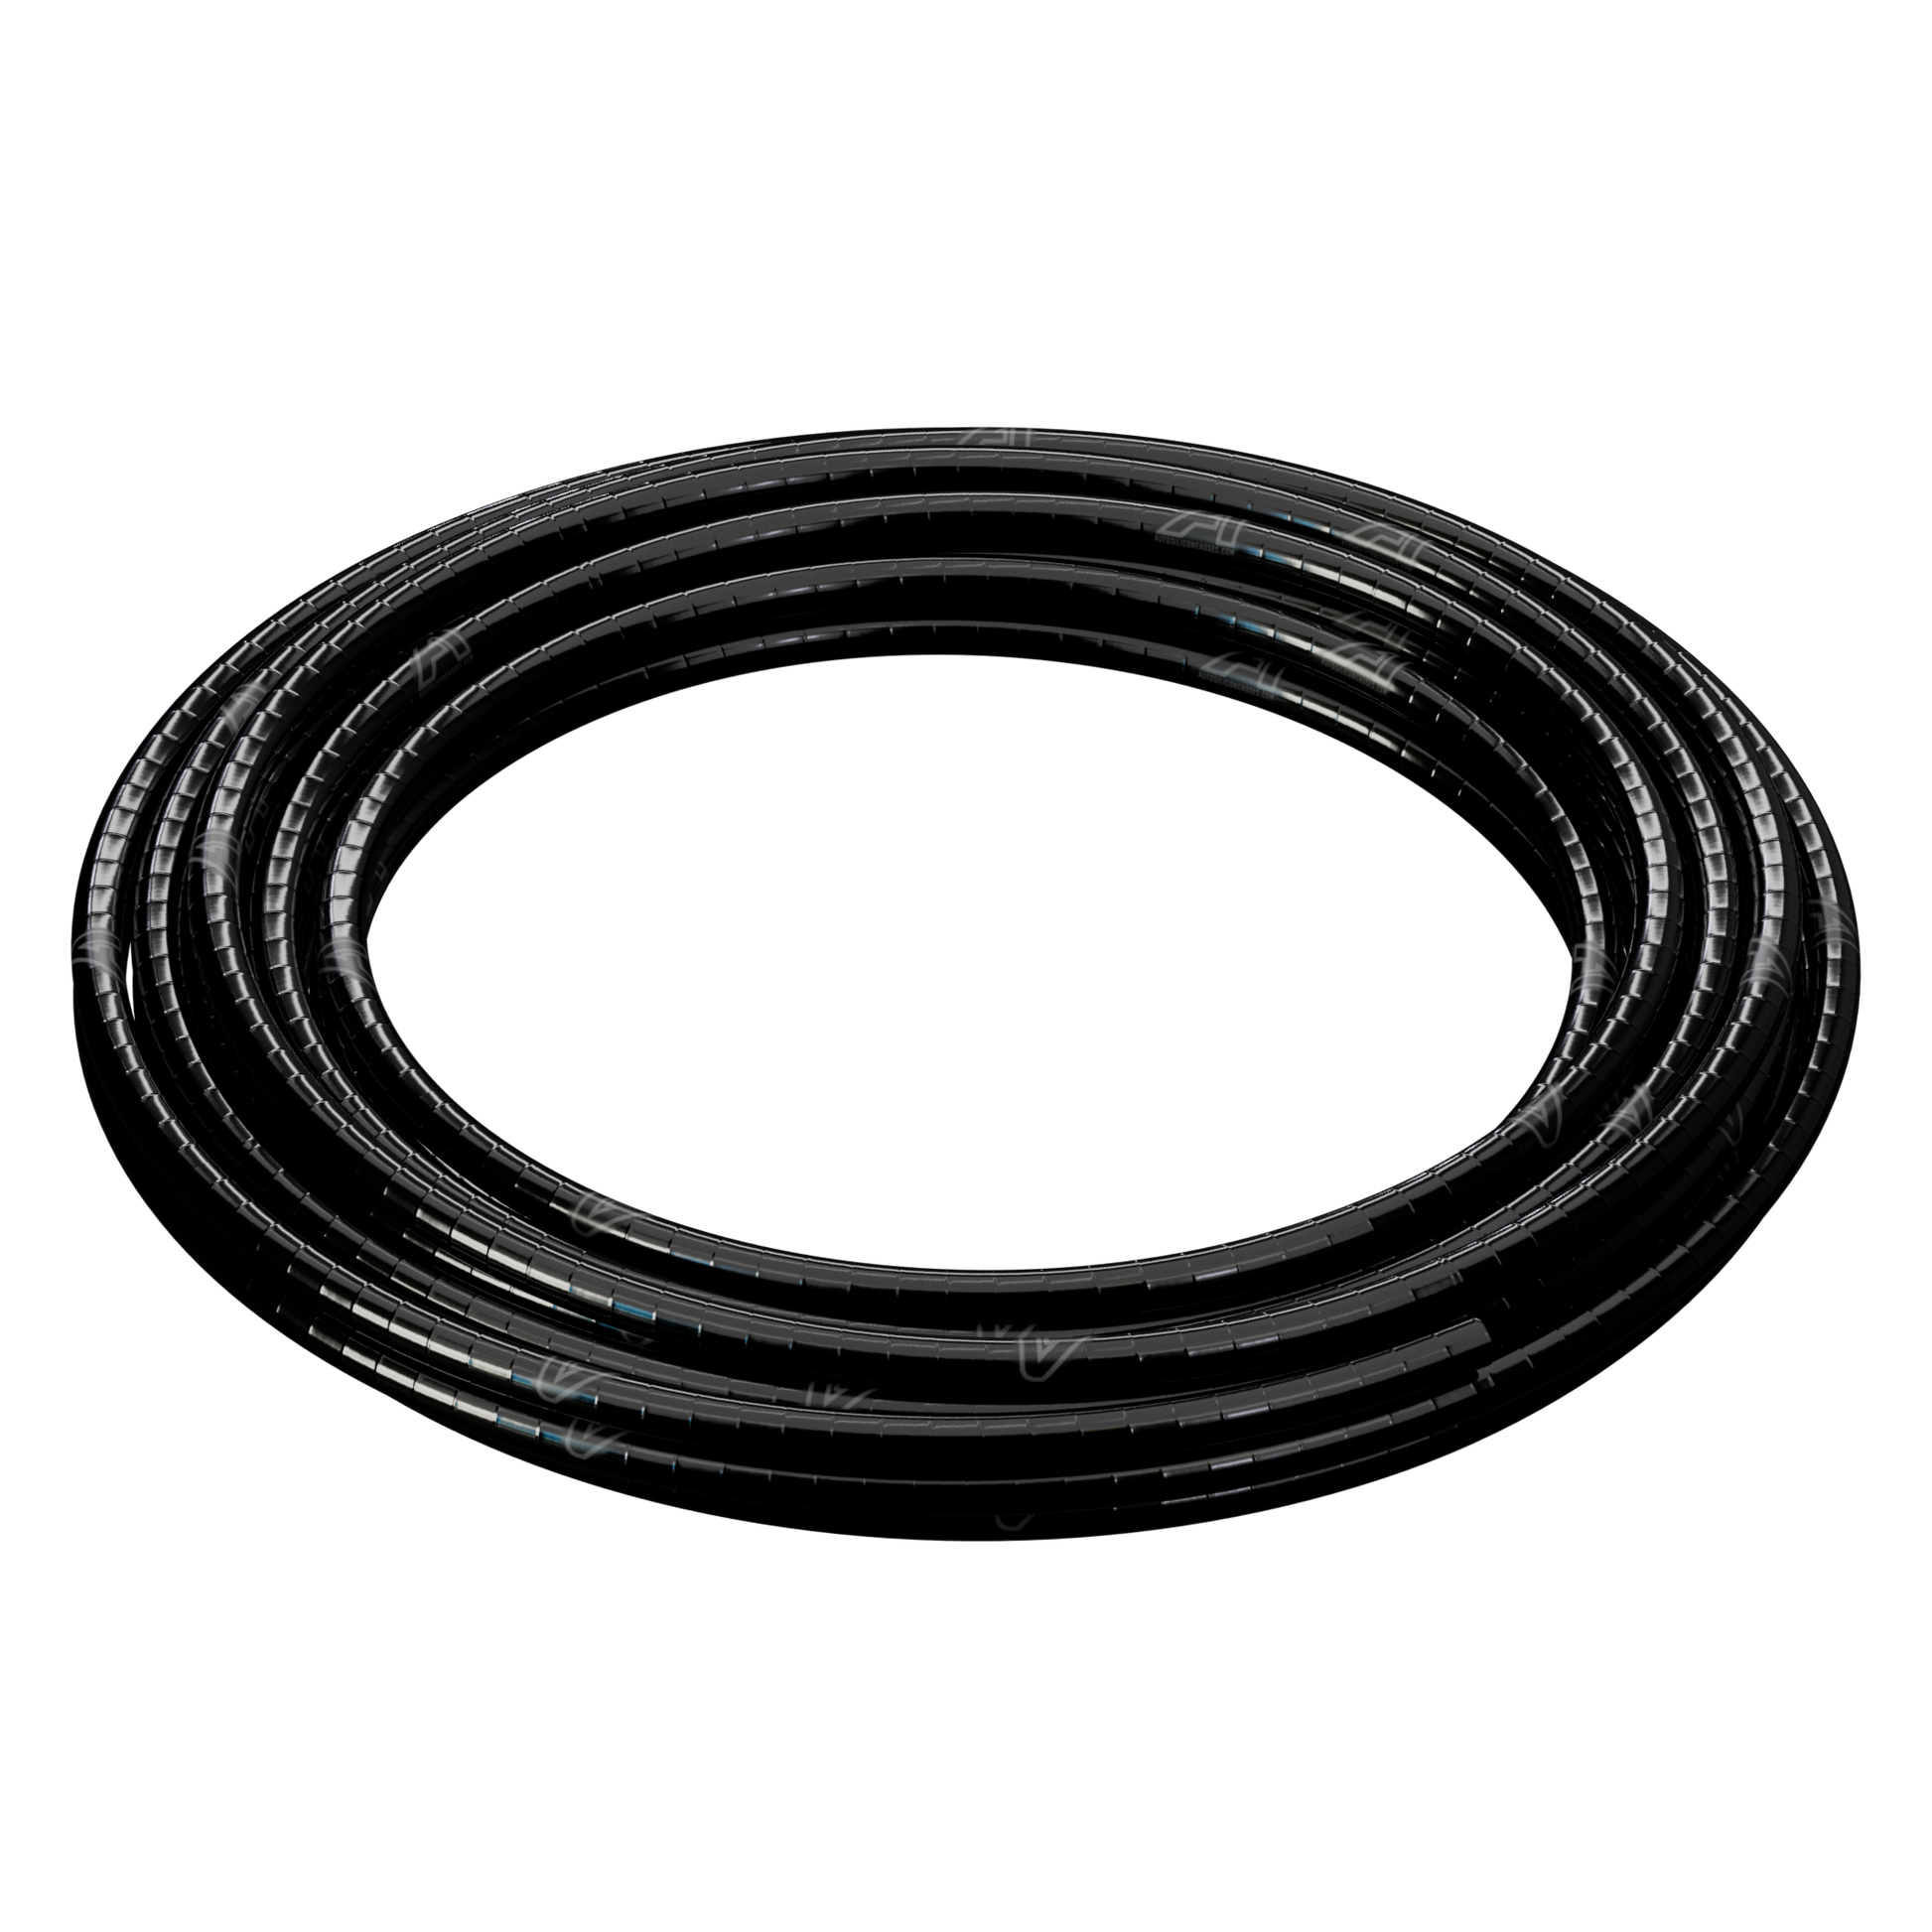 13mm ID Black Continuous Silicone Hose Motor Vehicle Engine Parts Auto Silicone Hoses   